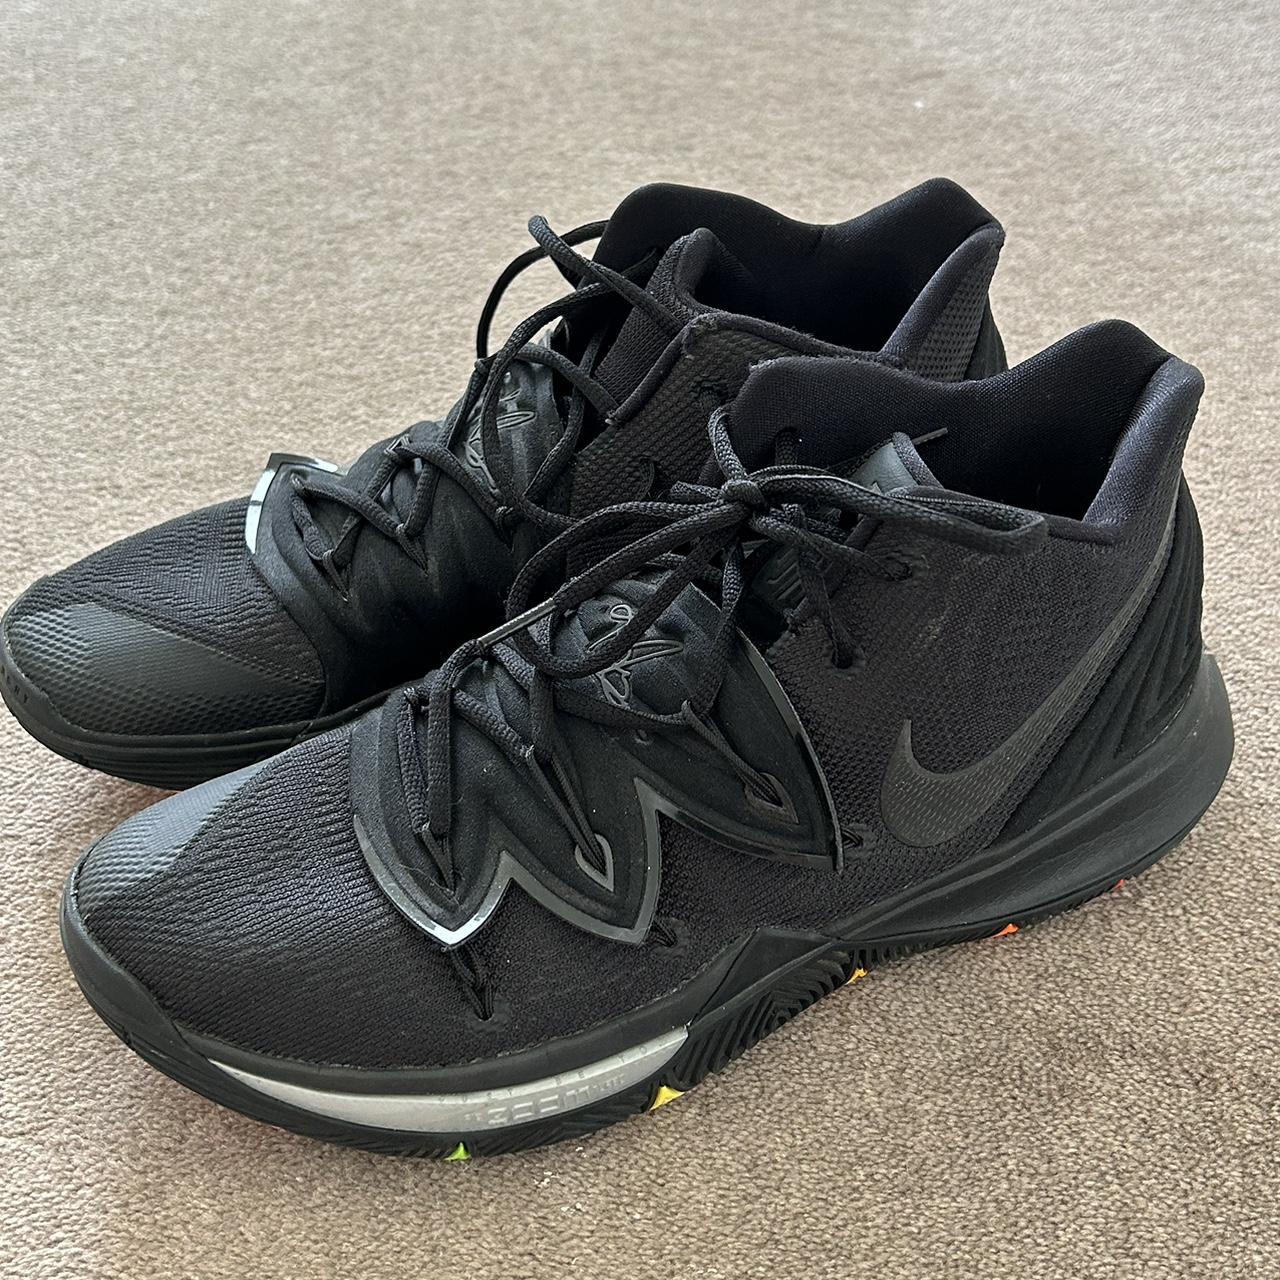 The Nike Kyrie 5 basketball shoe Played In one... - Depop